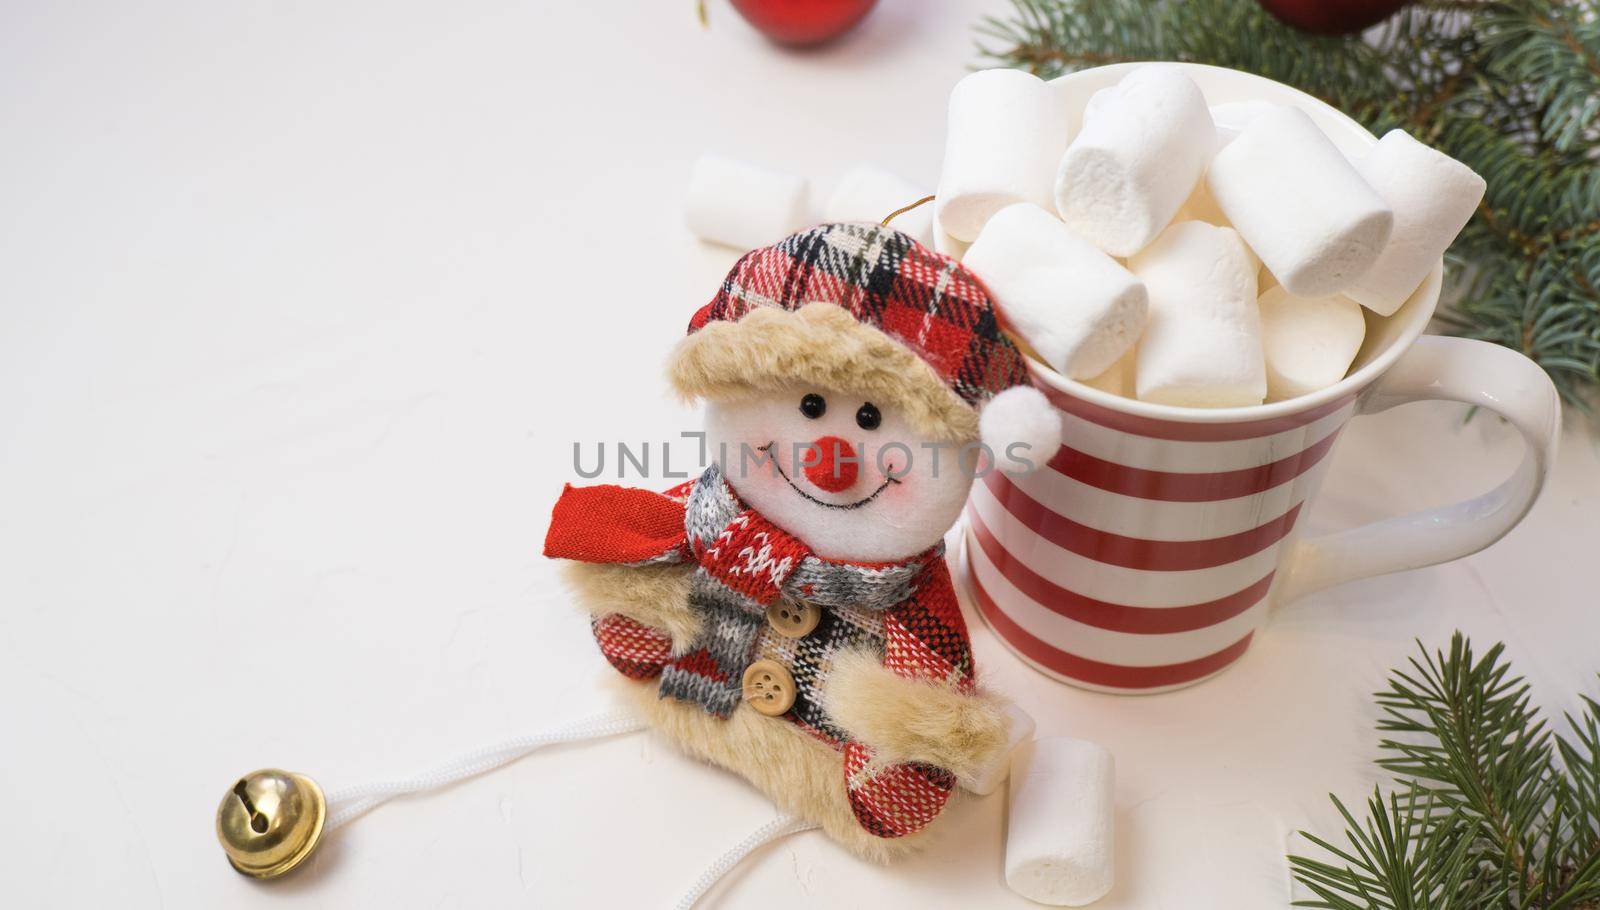 Traditional hot chocolate with marshmallows and a snowman on a white textured background. Christmas drink theme